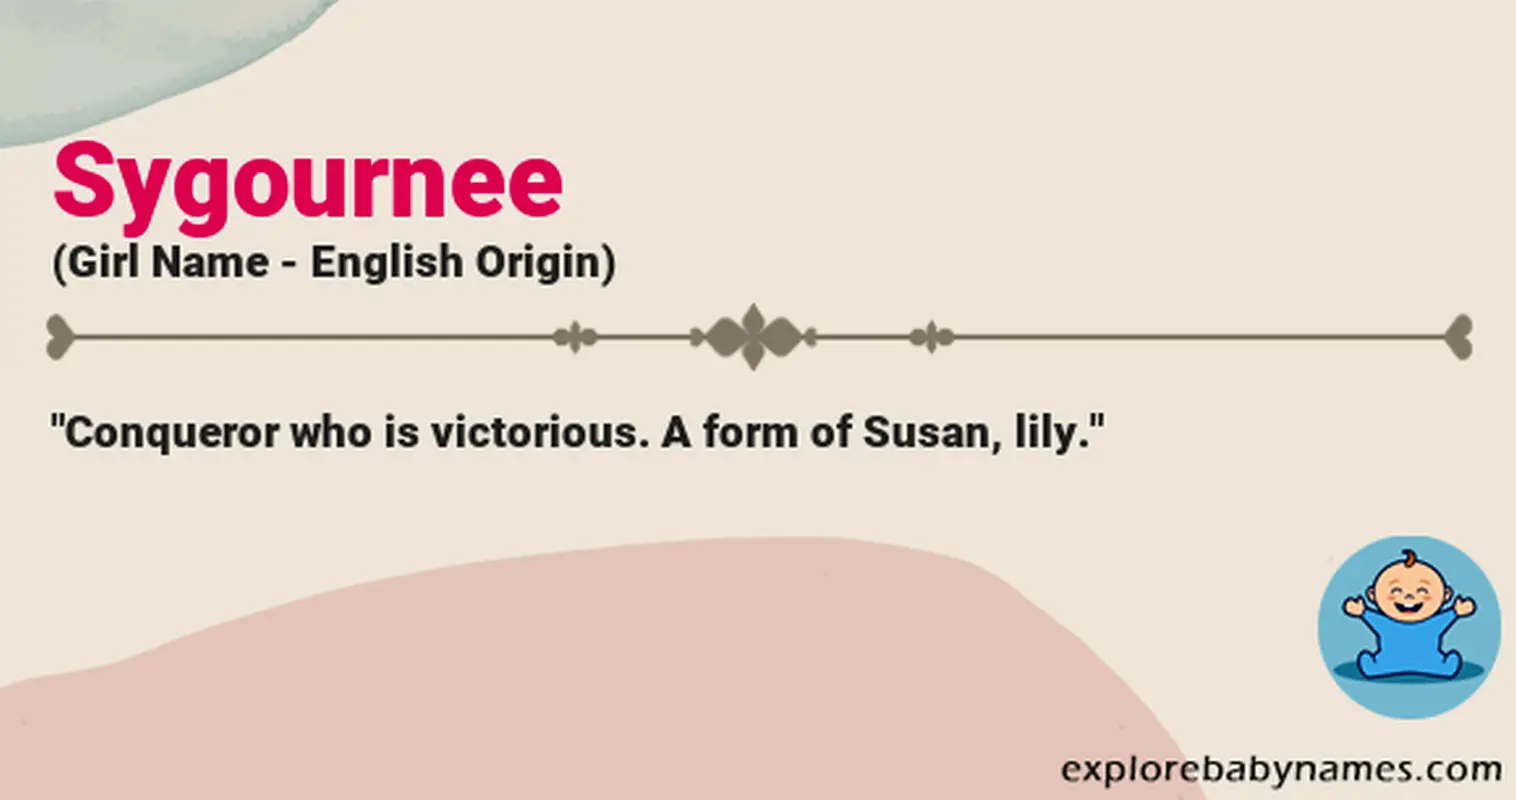 Meaning of Sygournee